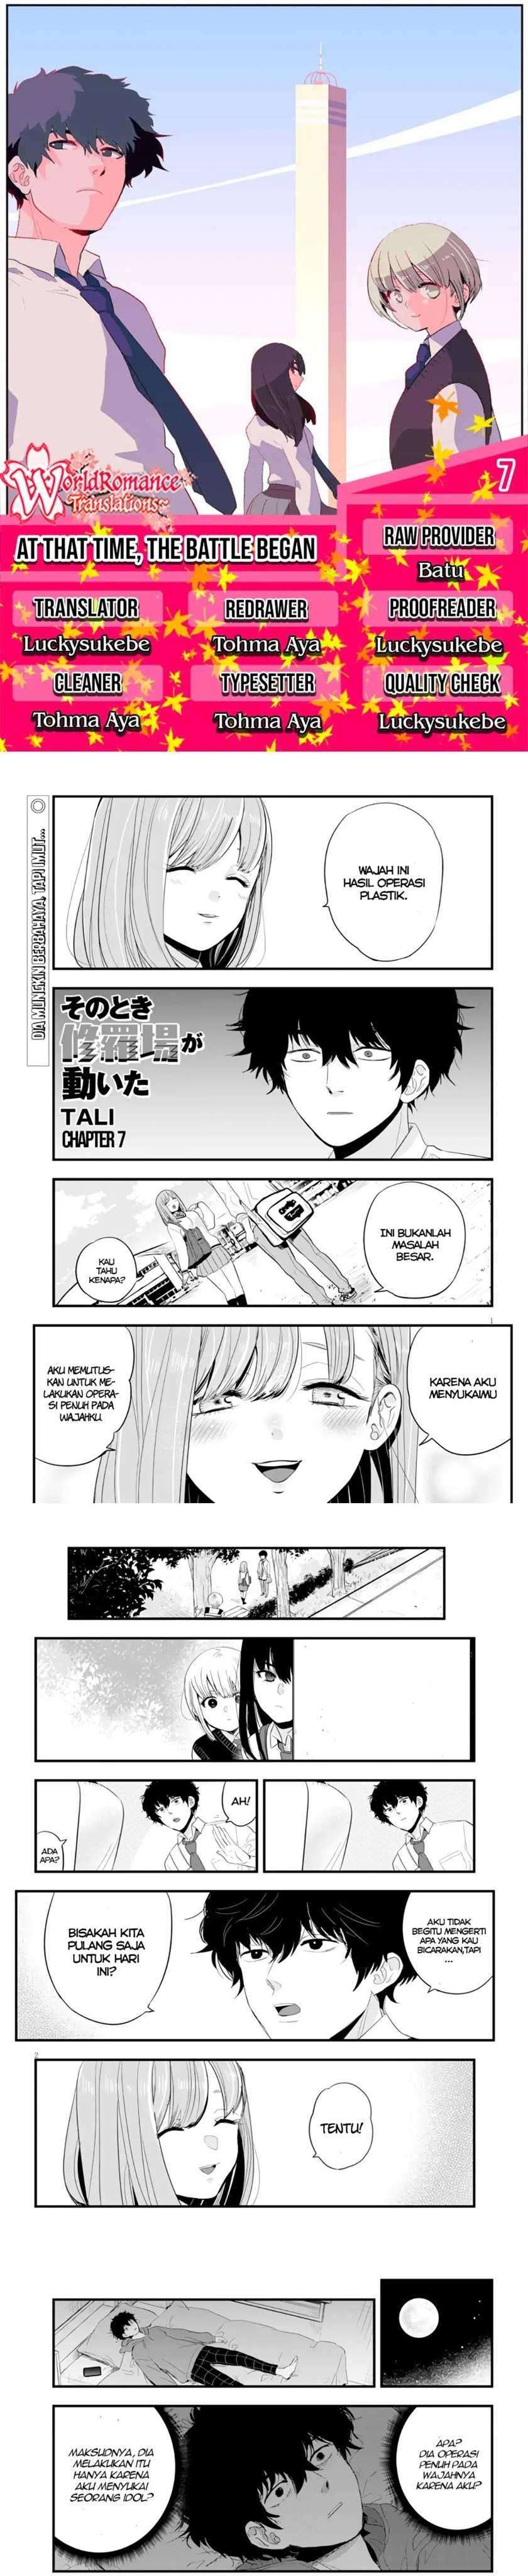 At That Time, The Battle Began (Yandere x Yandere) Chapter 07